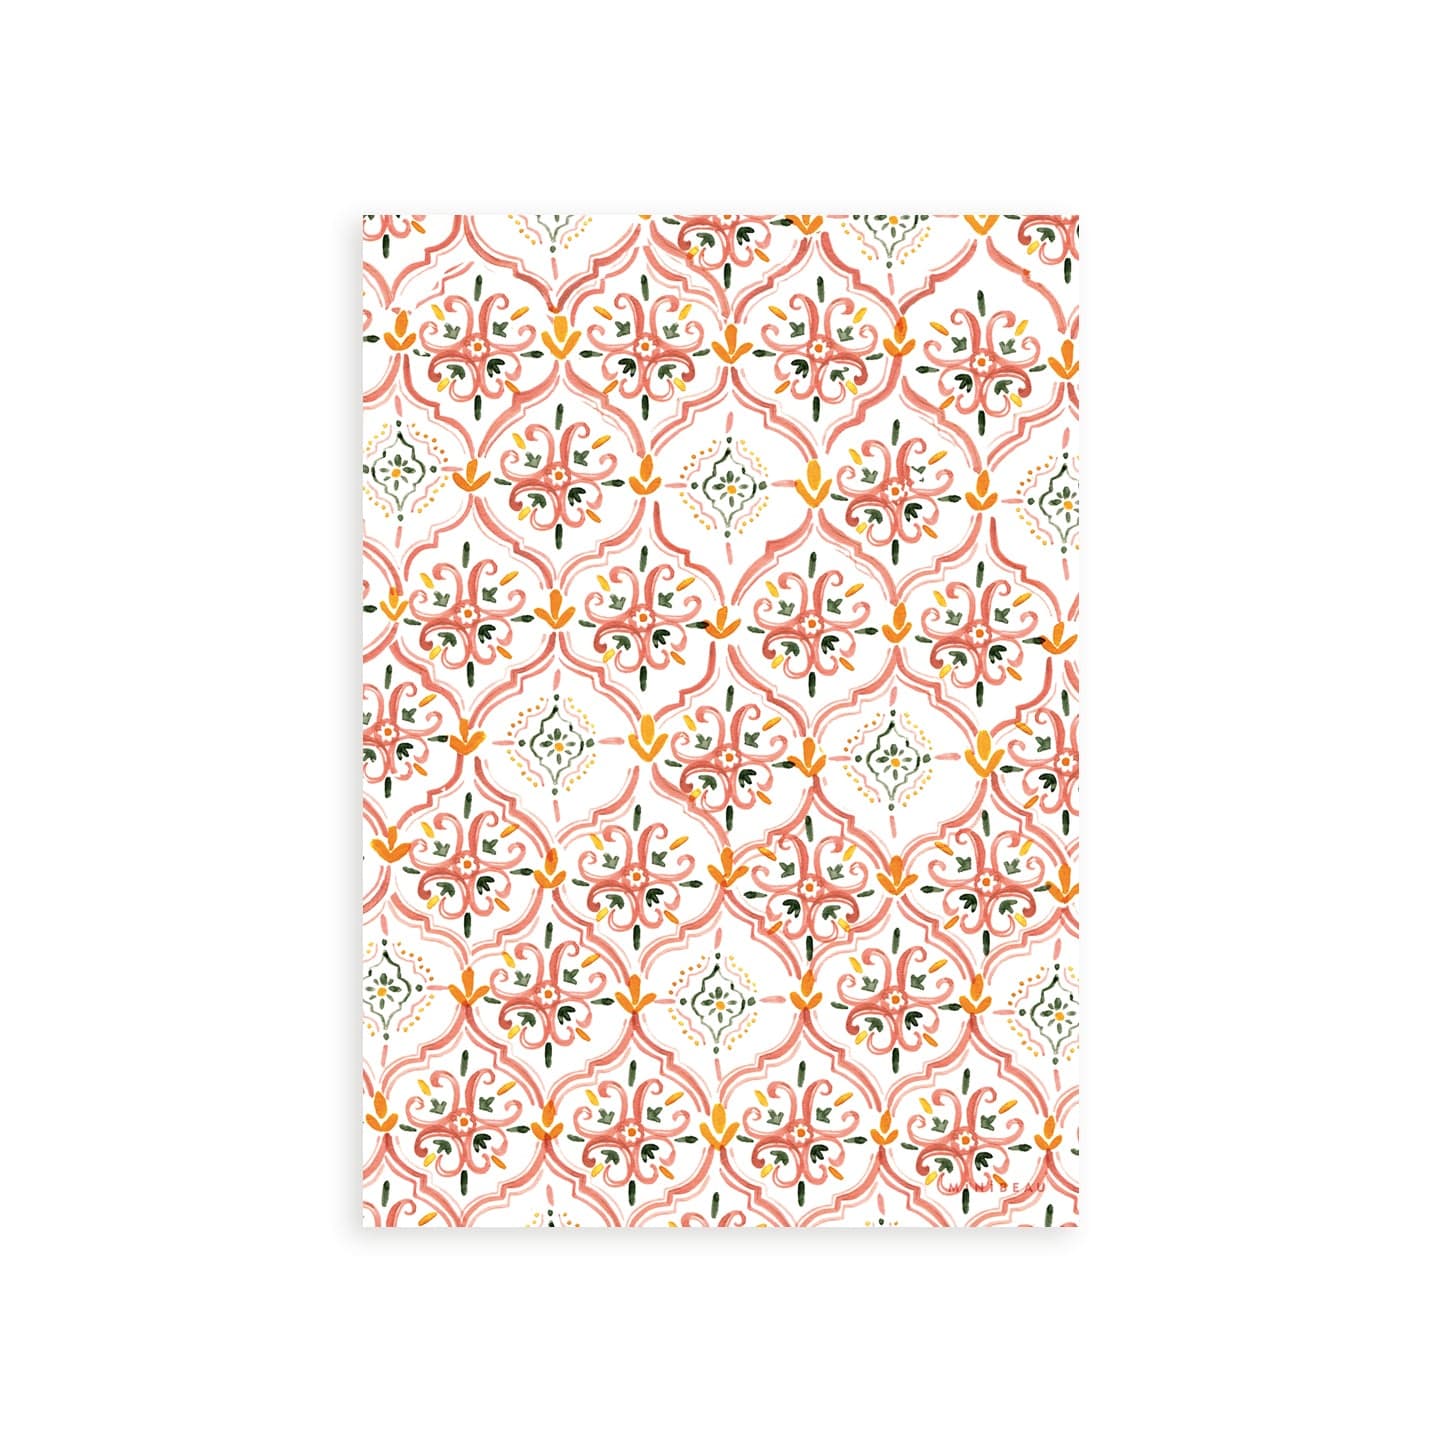 Our Kristina Art print is a repeating Kristina  'tile' pattern in coral pink, orange, and green floral print